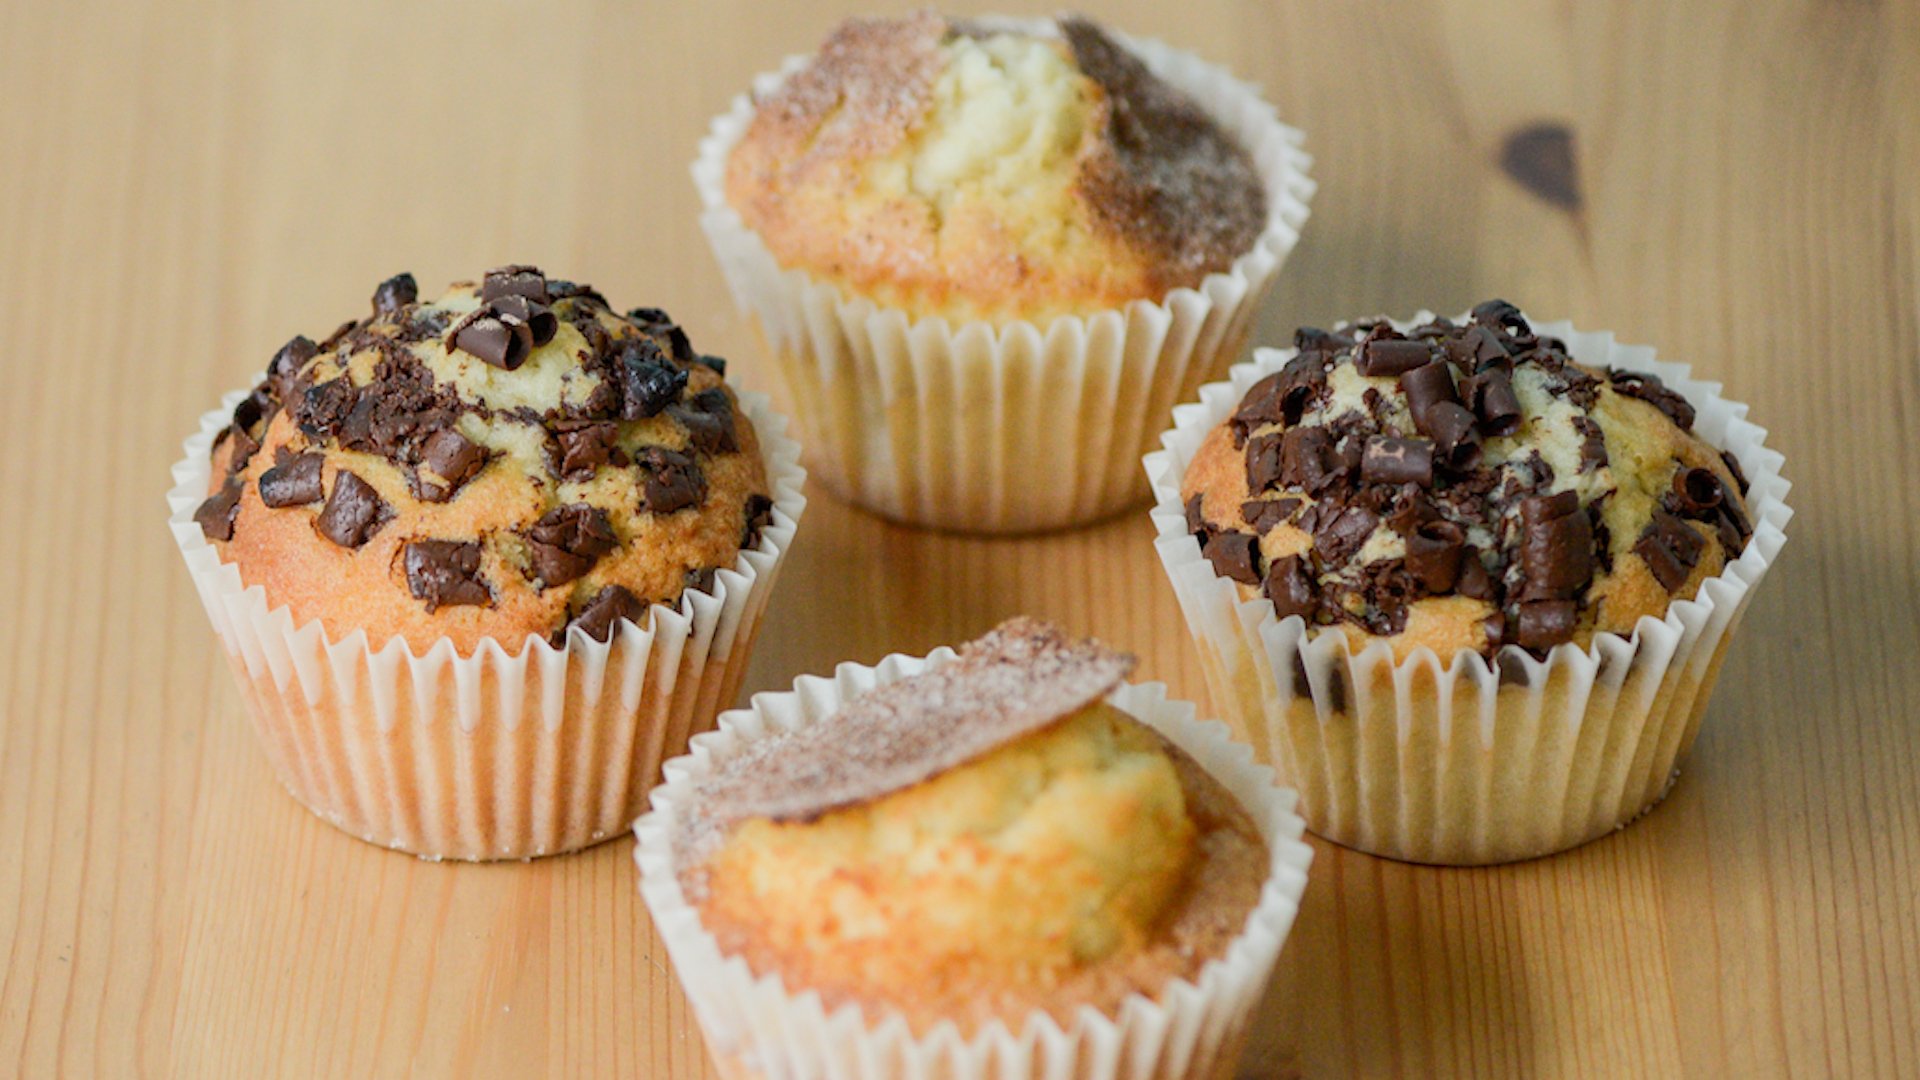 The recipe for a good old muffin